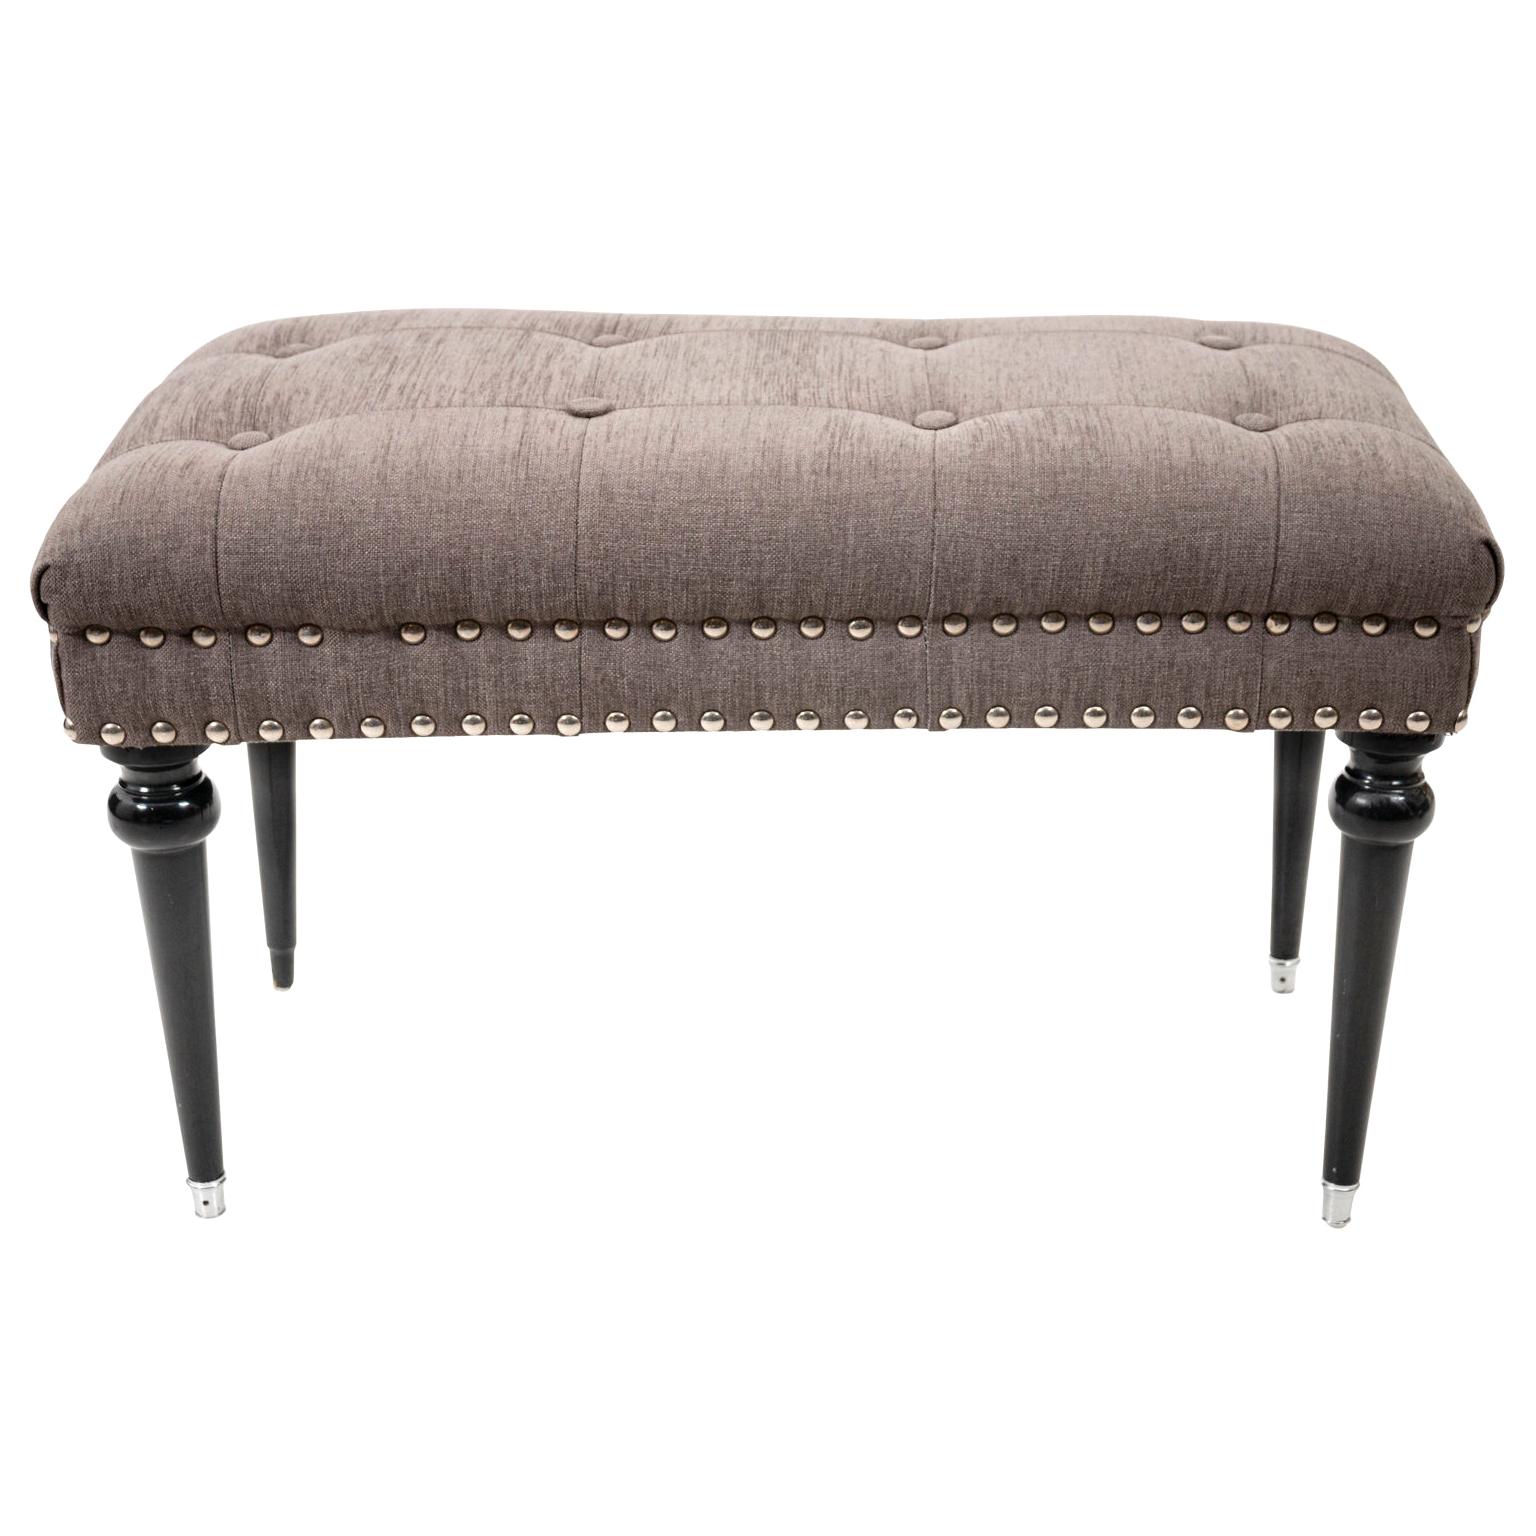 Mid-Century Modern Black and Grey Tufted Bench